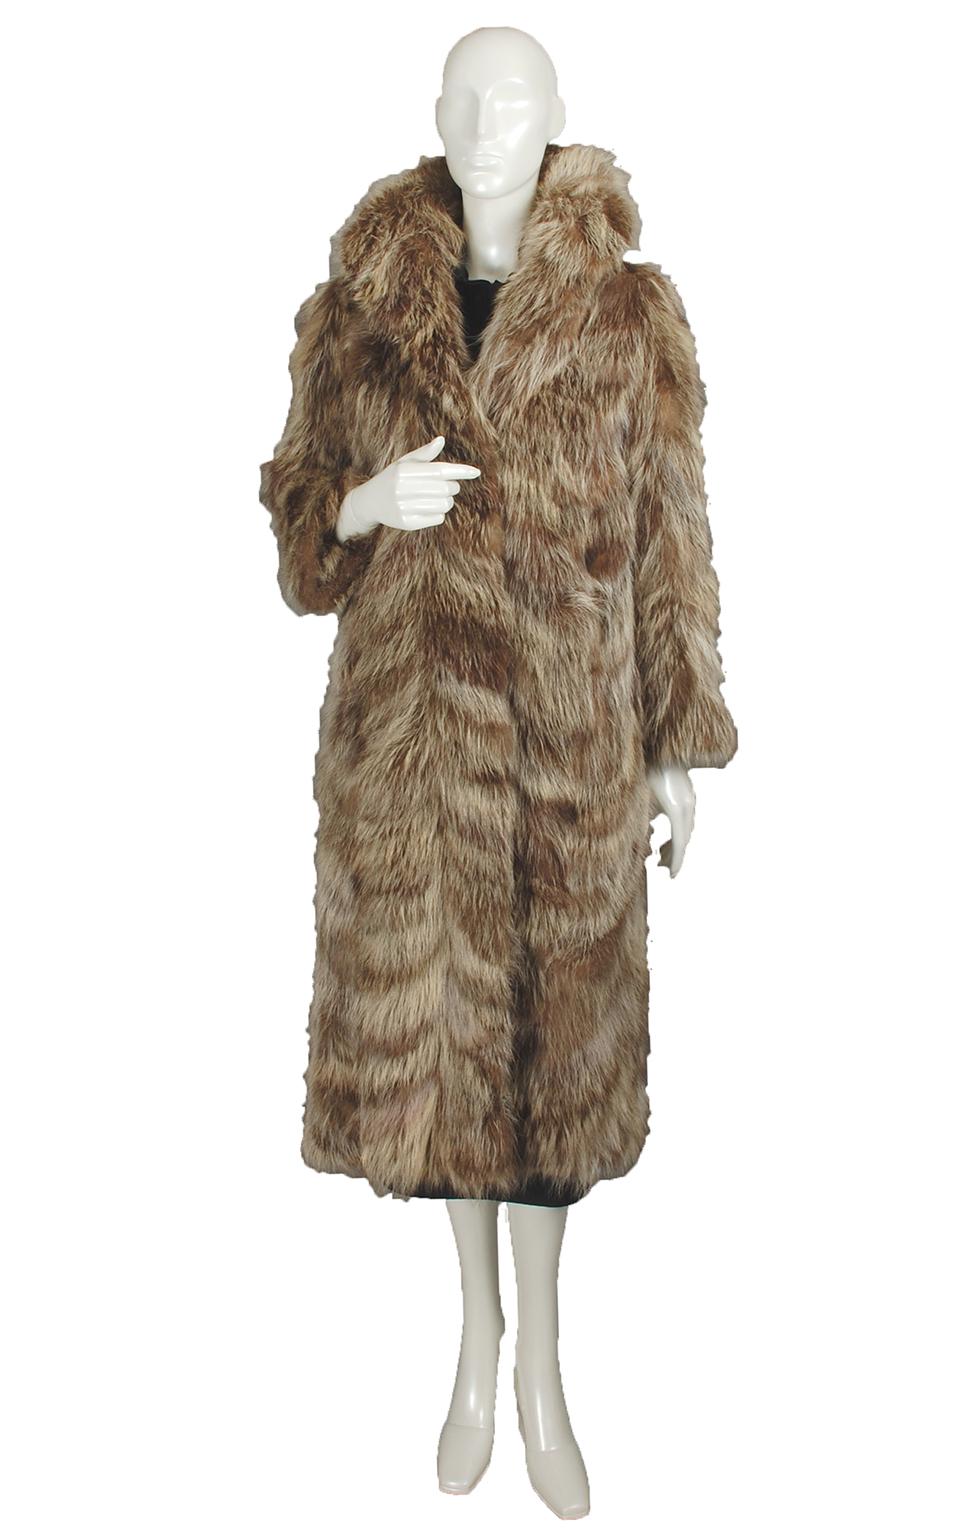 Back in the 1920s, no self-respecting Ivy Leaguer would attend a game without a raccoon coat (see photos), and in 1928 George Olsen wrote a tune about them. This model, sized and cut for a woman’s figure, is a perfect mix of the blue blooded 1920s